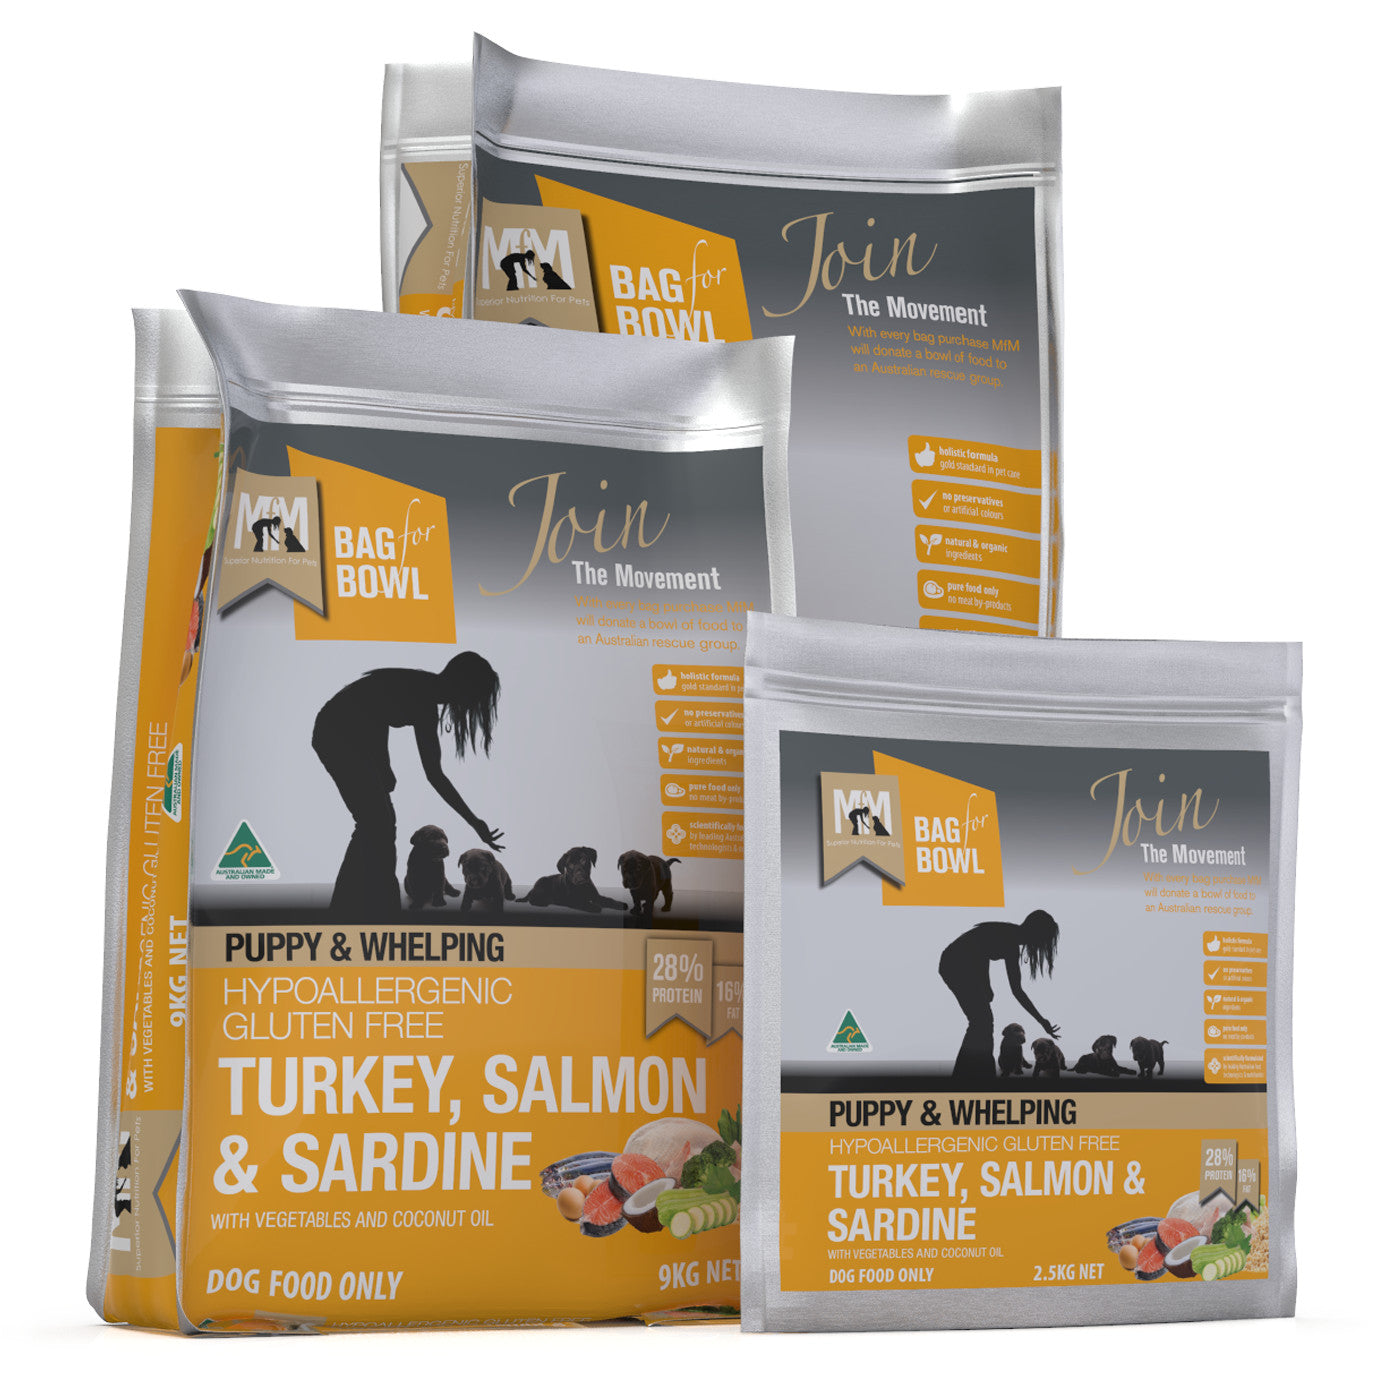 Puppy Food Delivered to Your Door - Meals for Mutts Turkey Salmon & Sardine